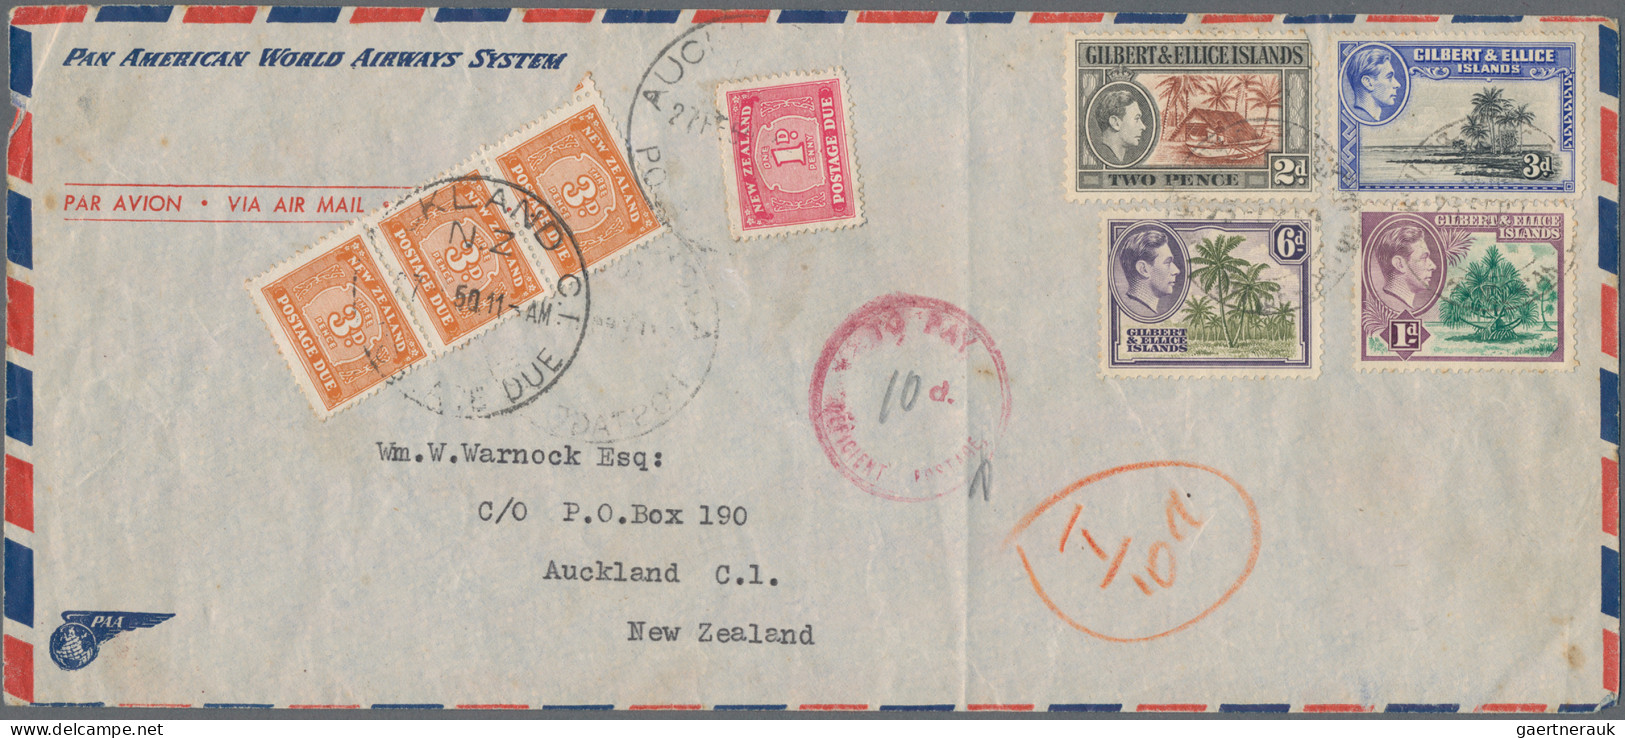 New Zealand - Postage Dues: 1950 Air Mail Envelope From Gilbert & Ellis Islands - Timbres-taxe